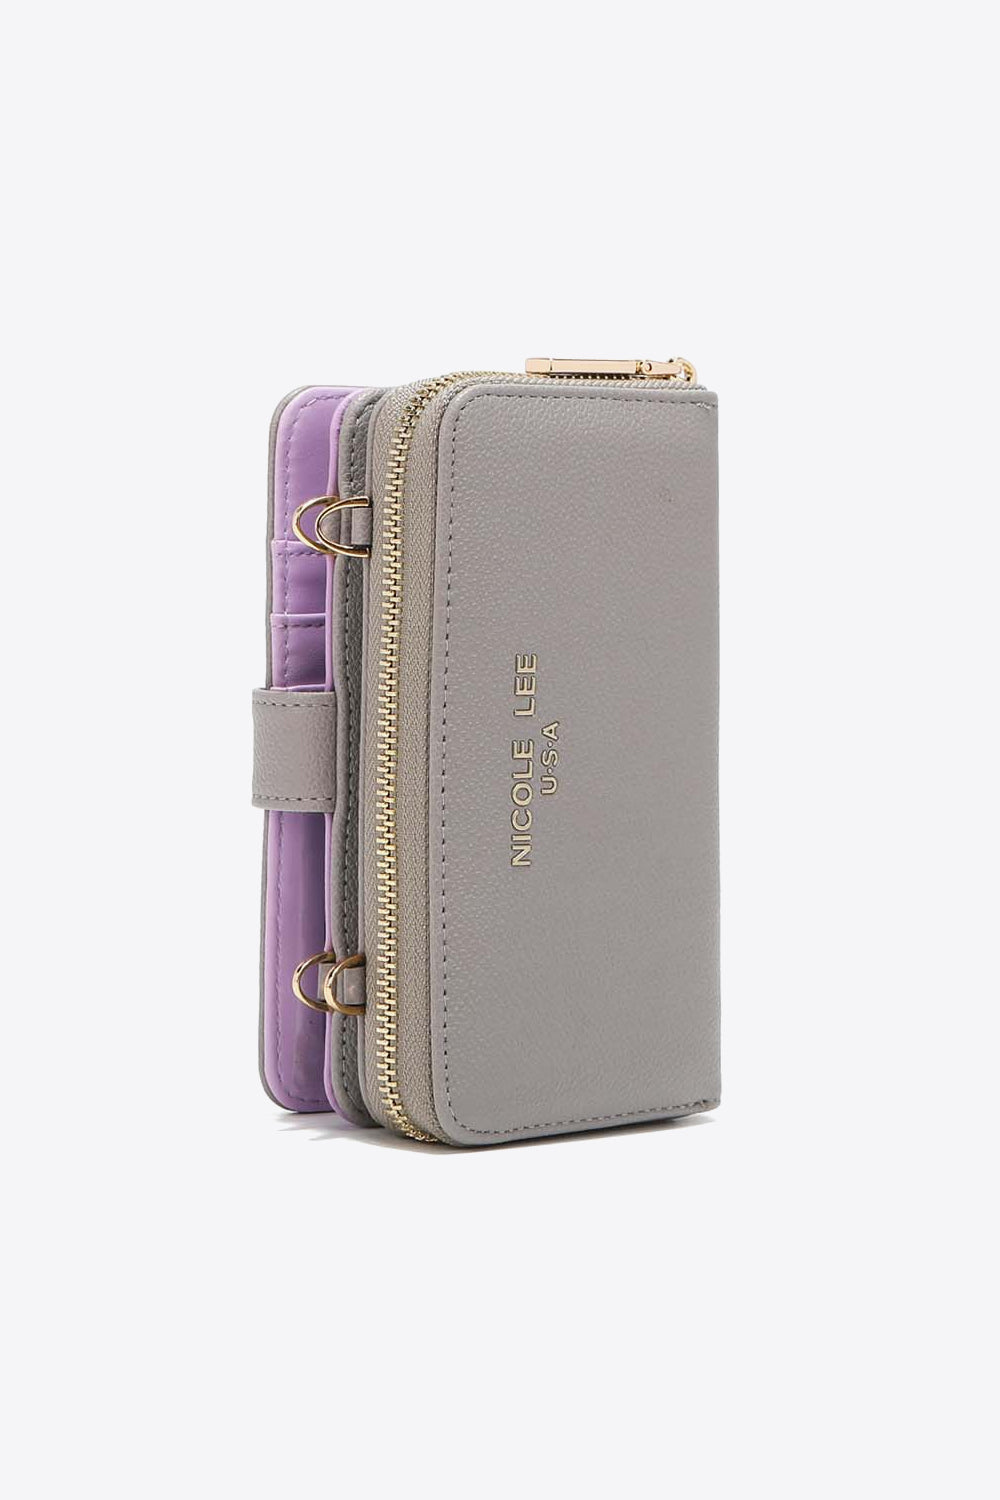 Phone Case Wallet Duo for Everyday Use